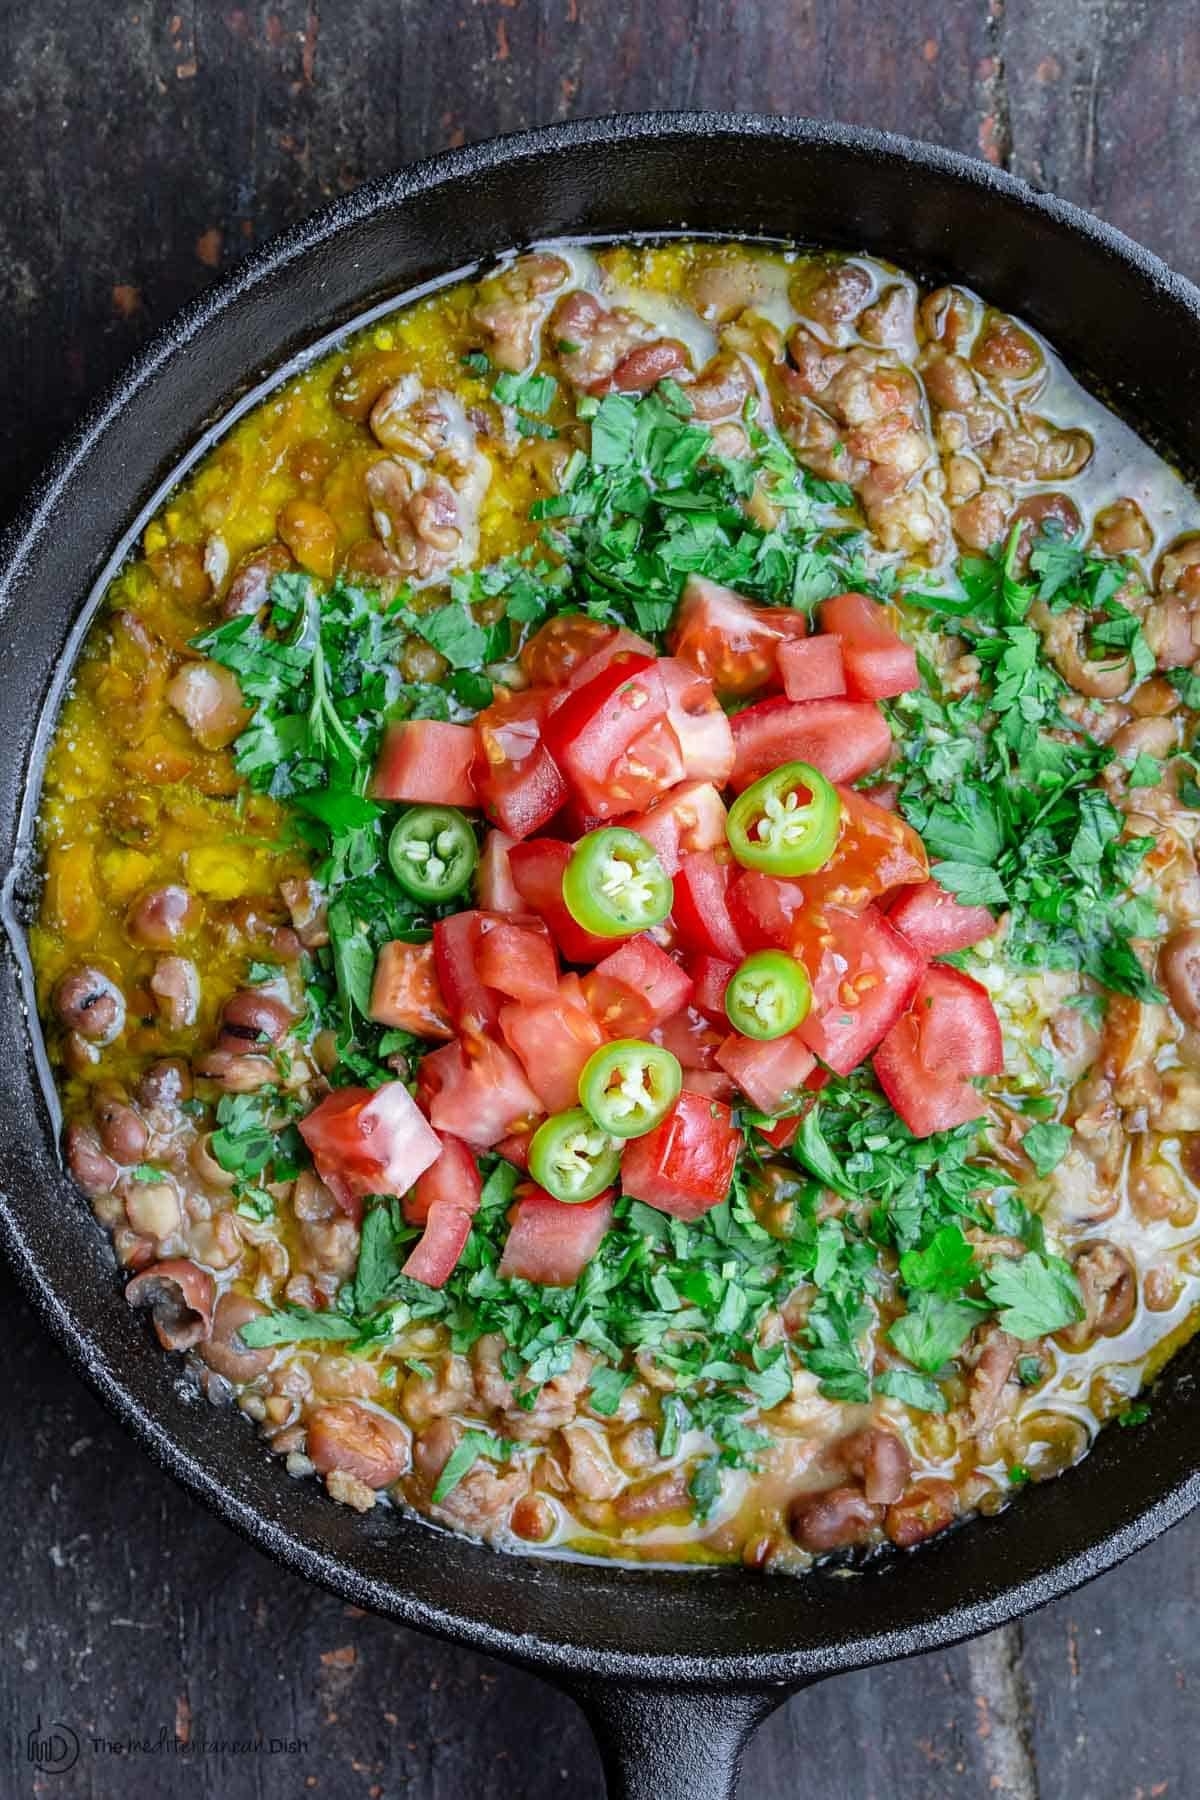 Egyptian fava bean dip in a skillet with tomatoes and herbs